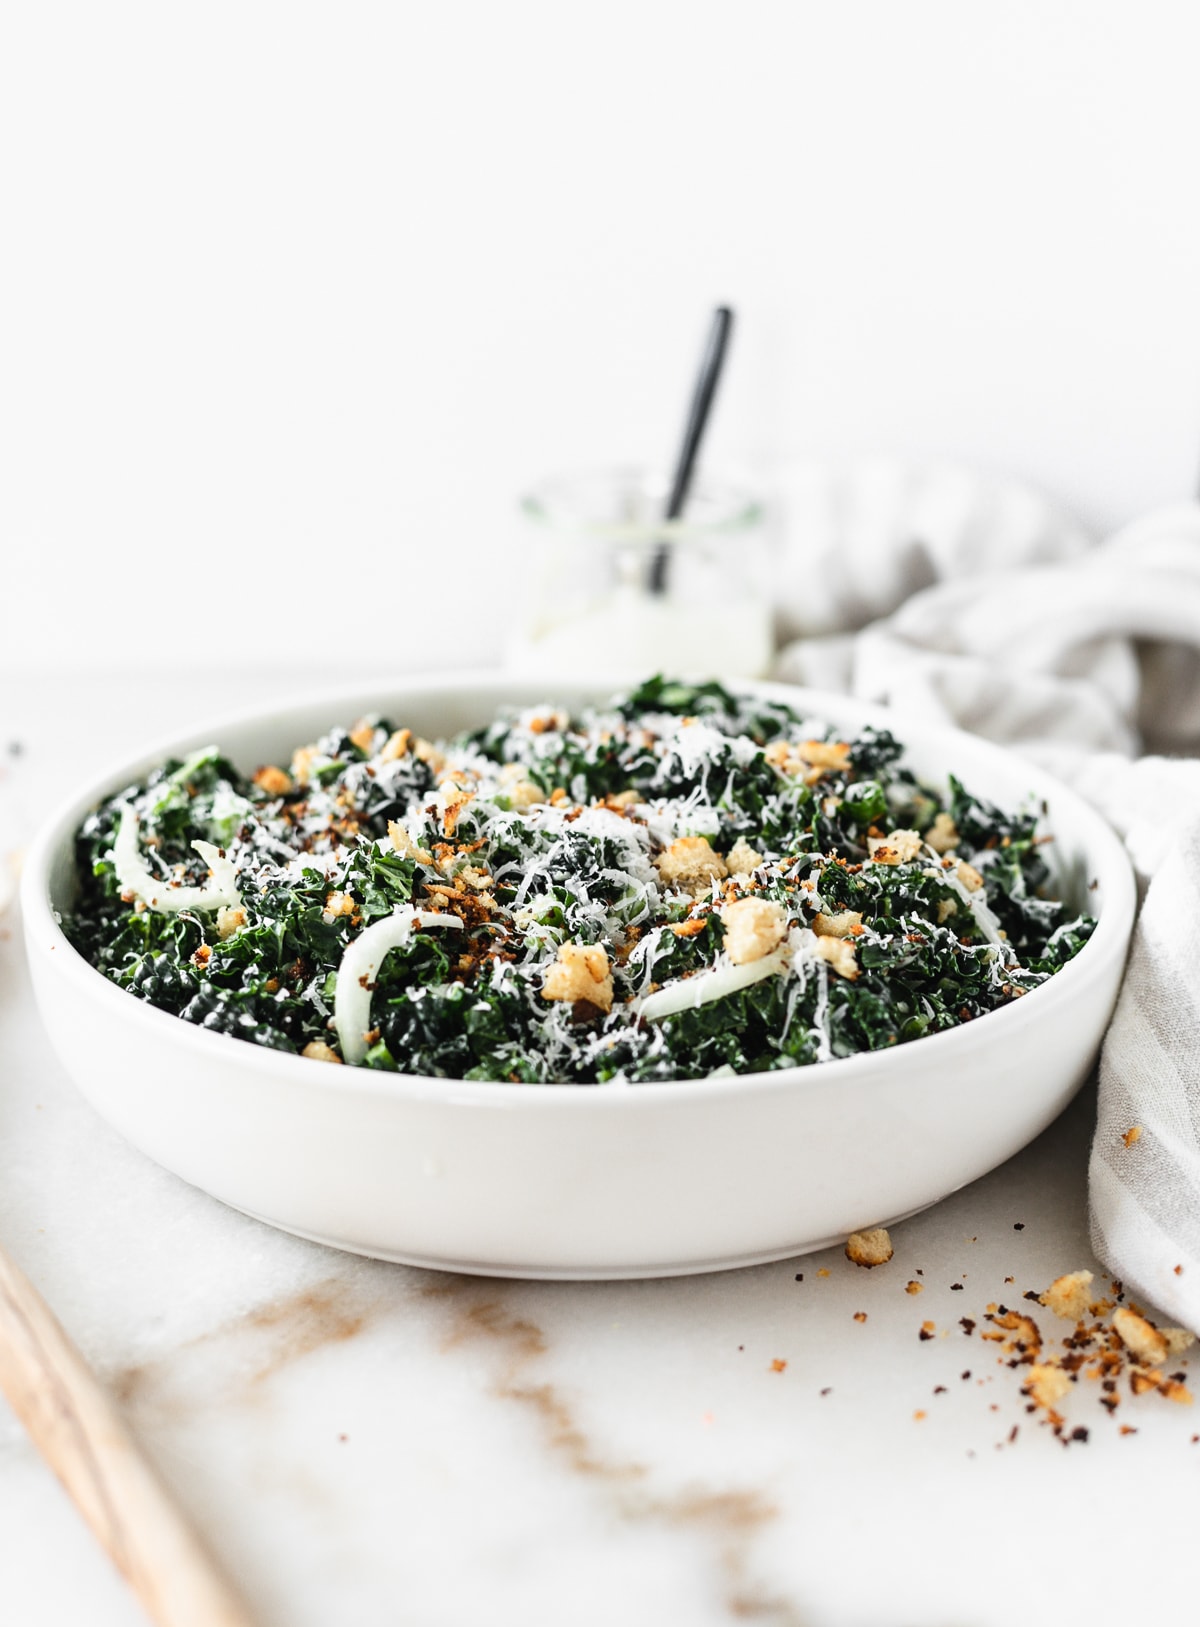 Healthy Kale Caesar Salad with Homemade Dressing